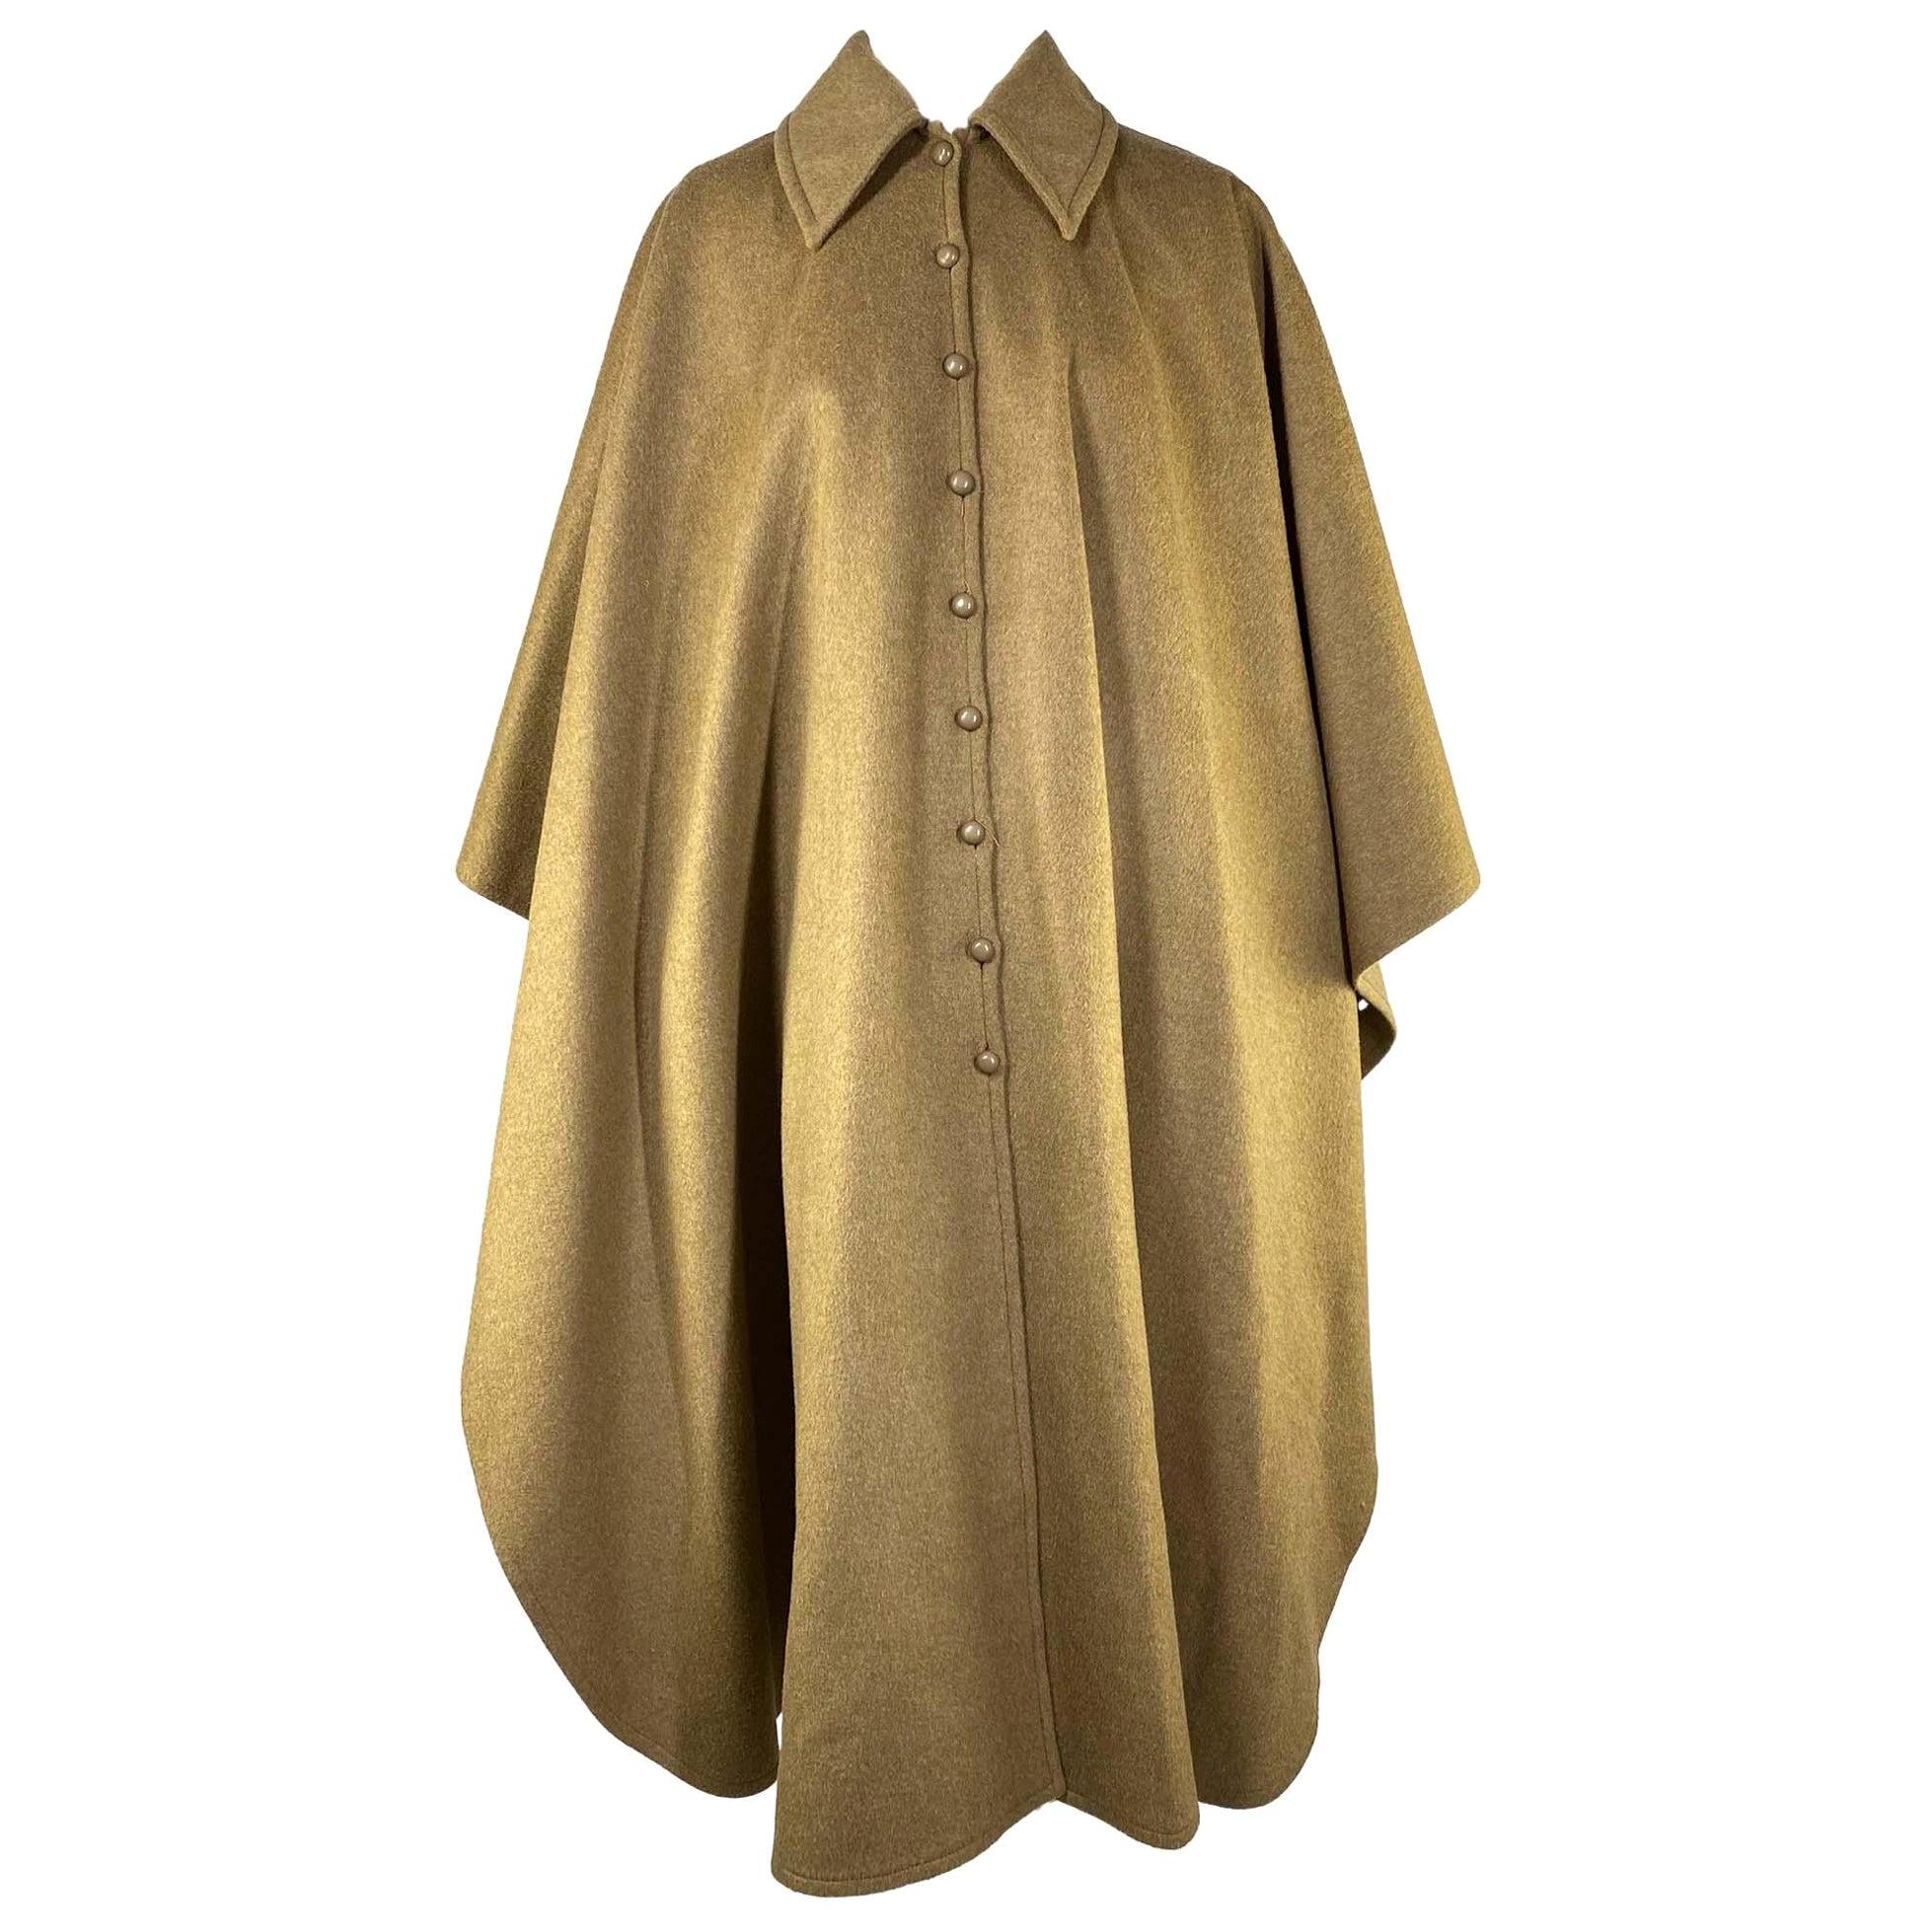 Early 1970s Saint Laurent Rive Gauche Camel Wool Button Up Collared Cloak Poncho